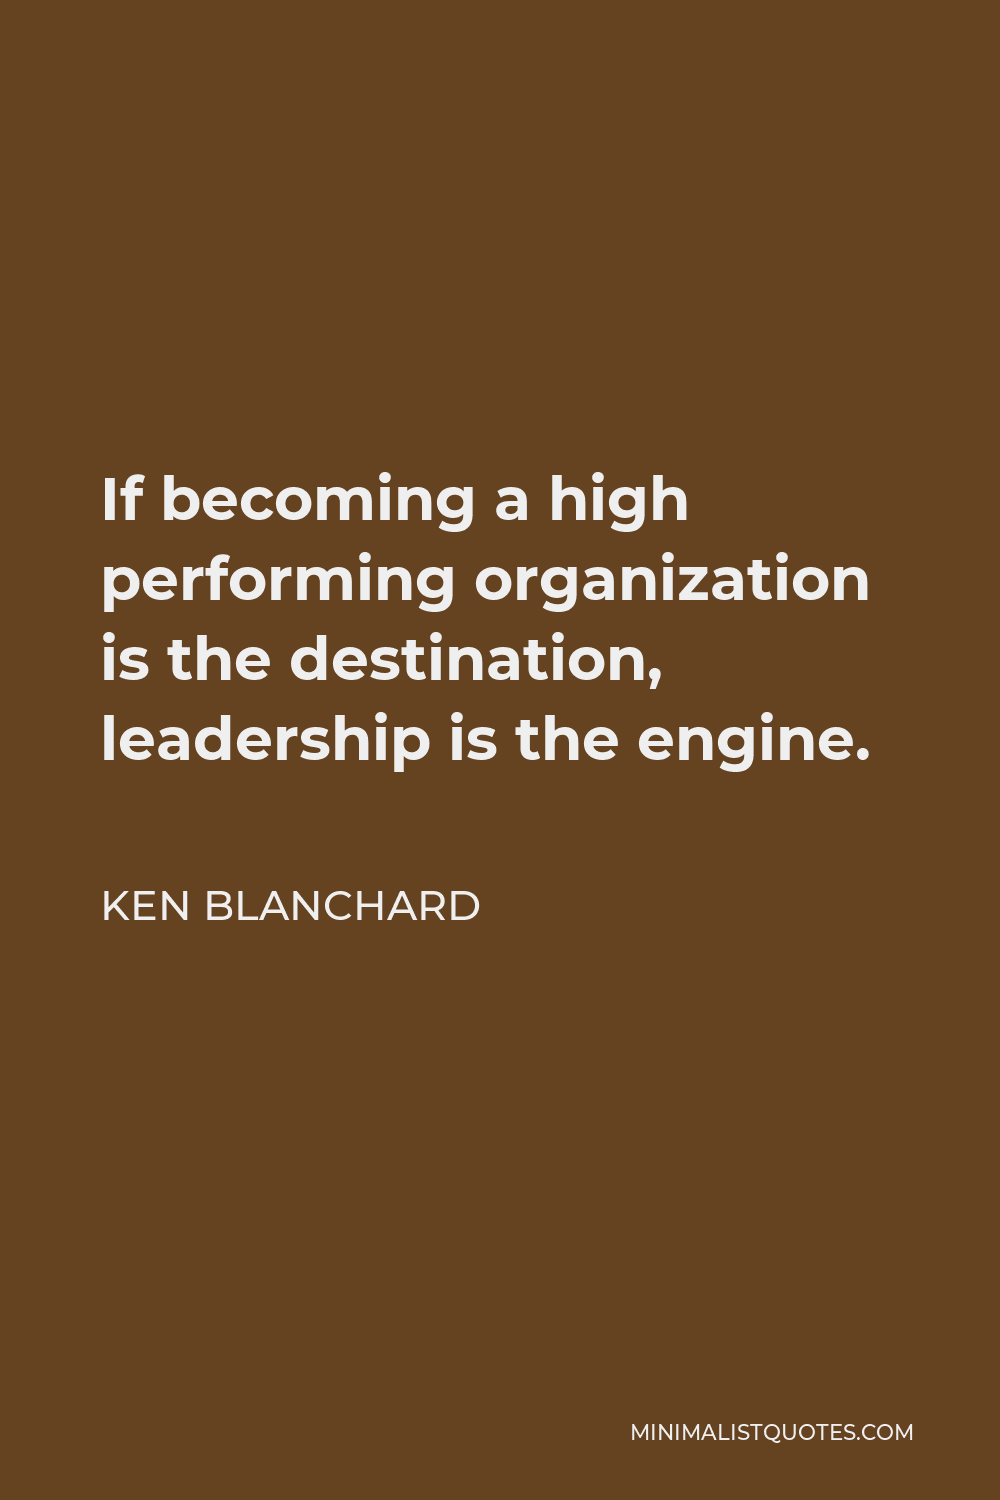 Ken Blanchard Quote - If becoming a high performing organization is the destination, leadership is the engine.